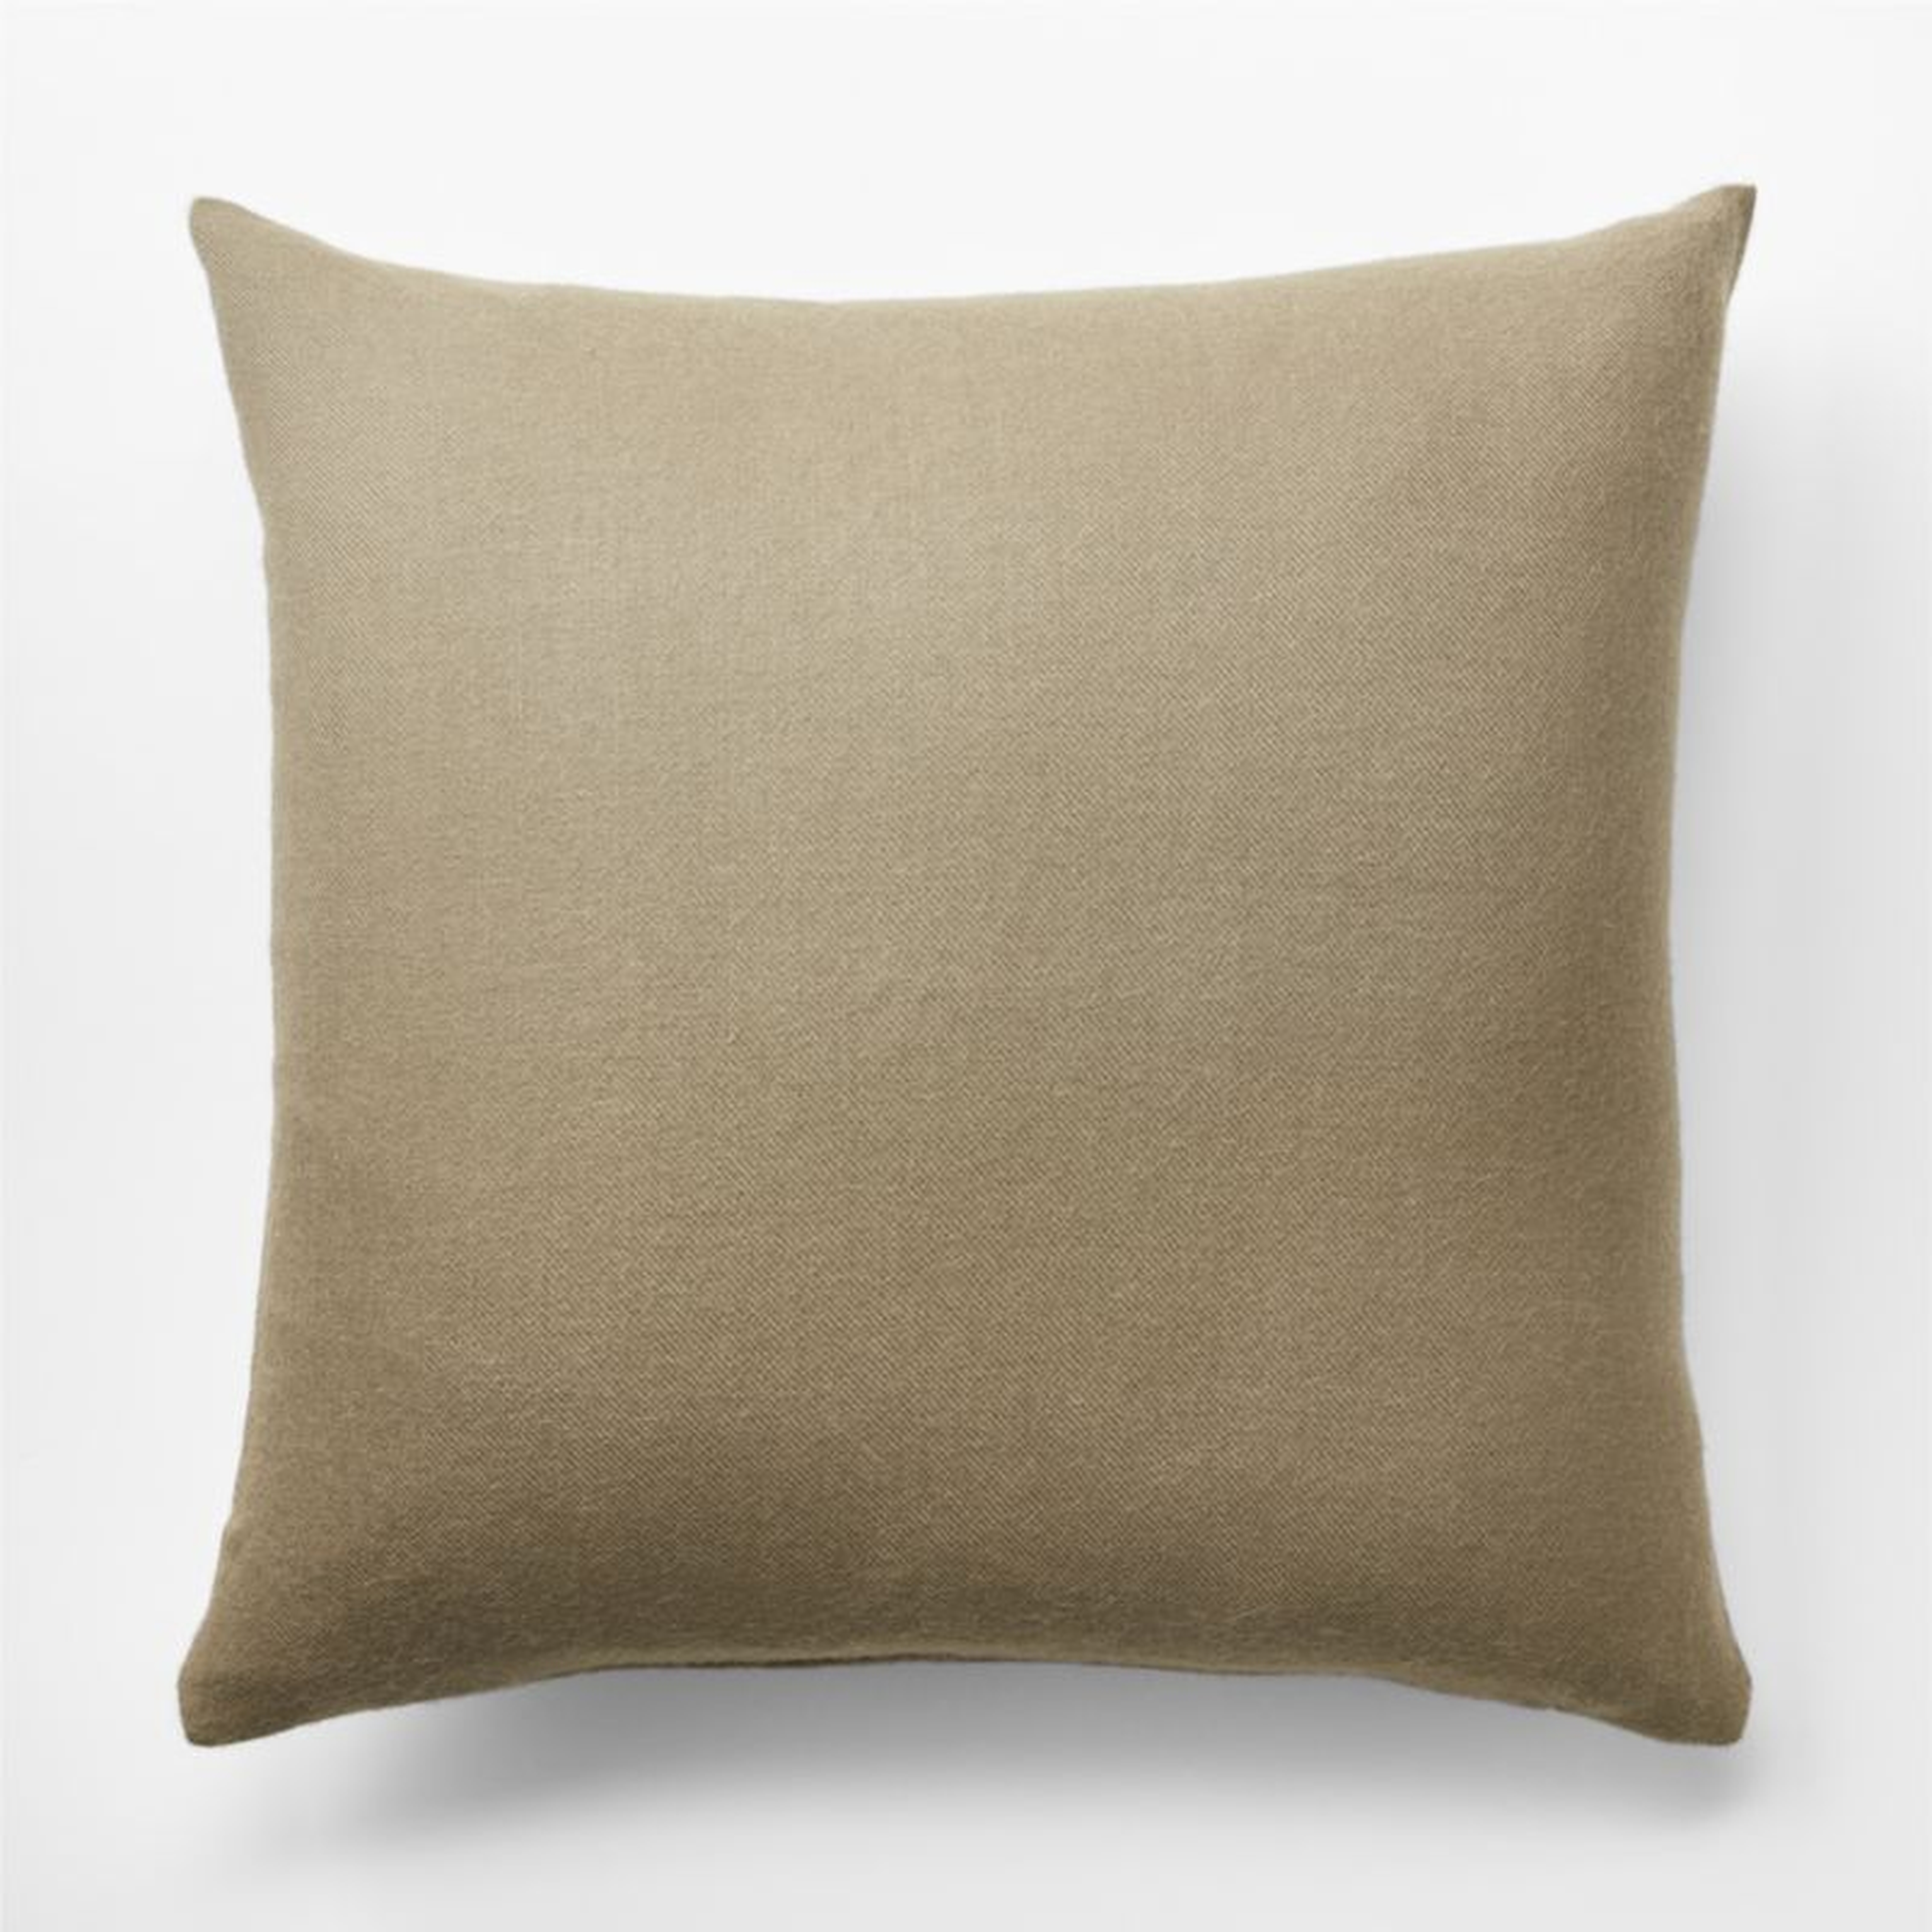 Alpaca Pillow with Feather-Down Insert, Olive, 20" x 20" - CB2